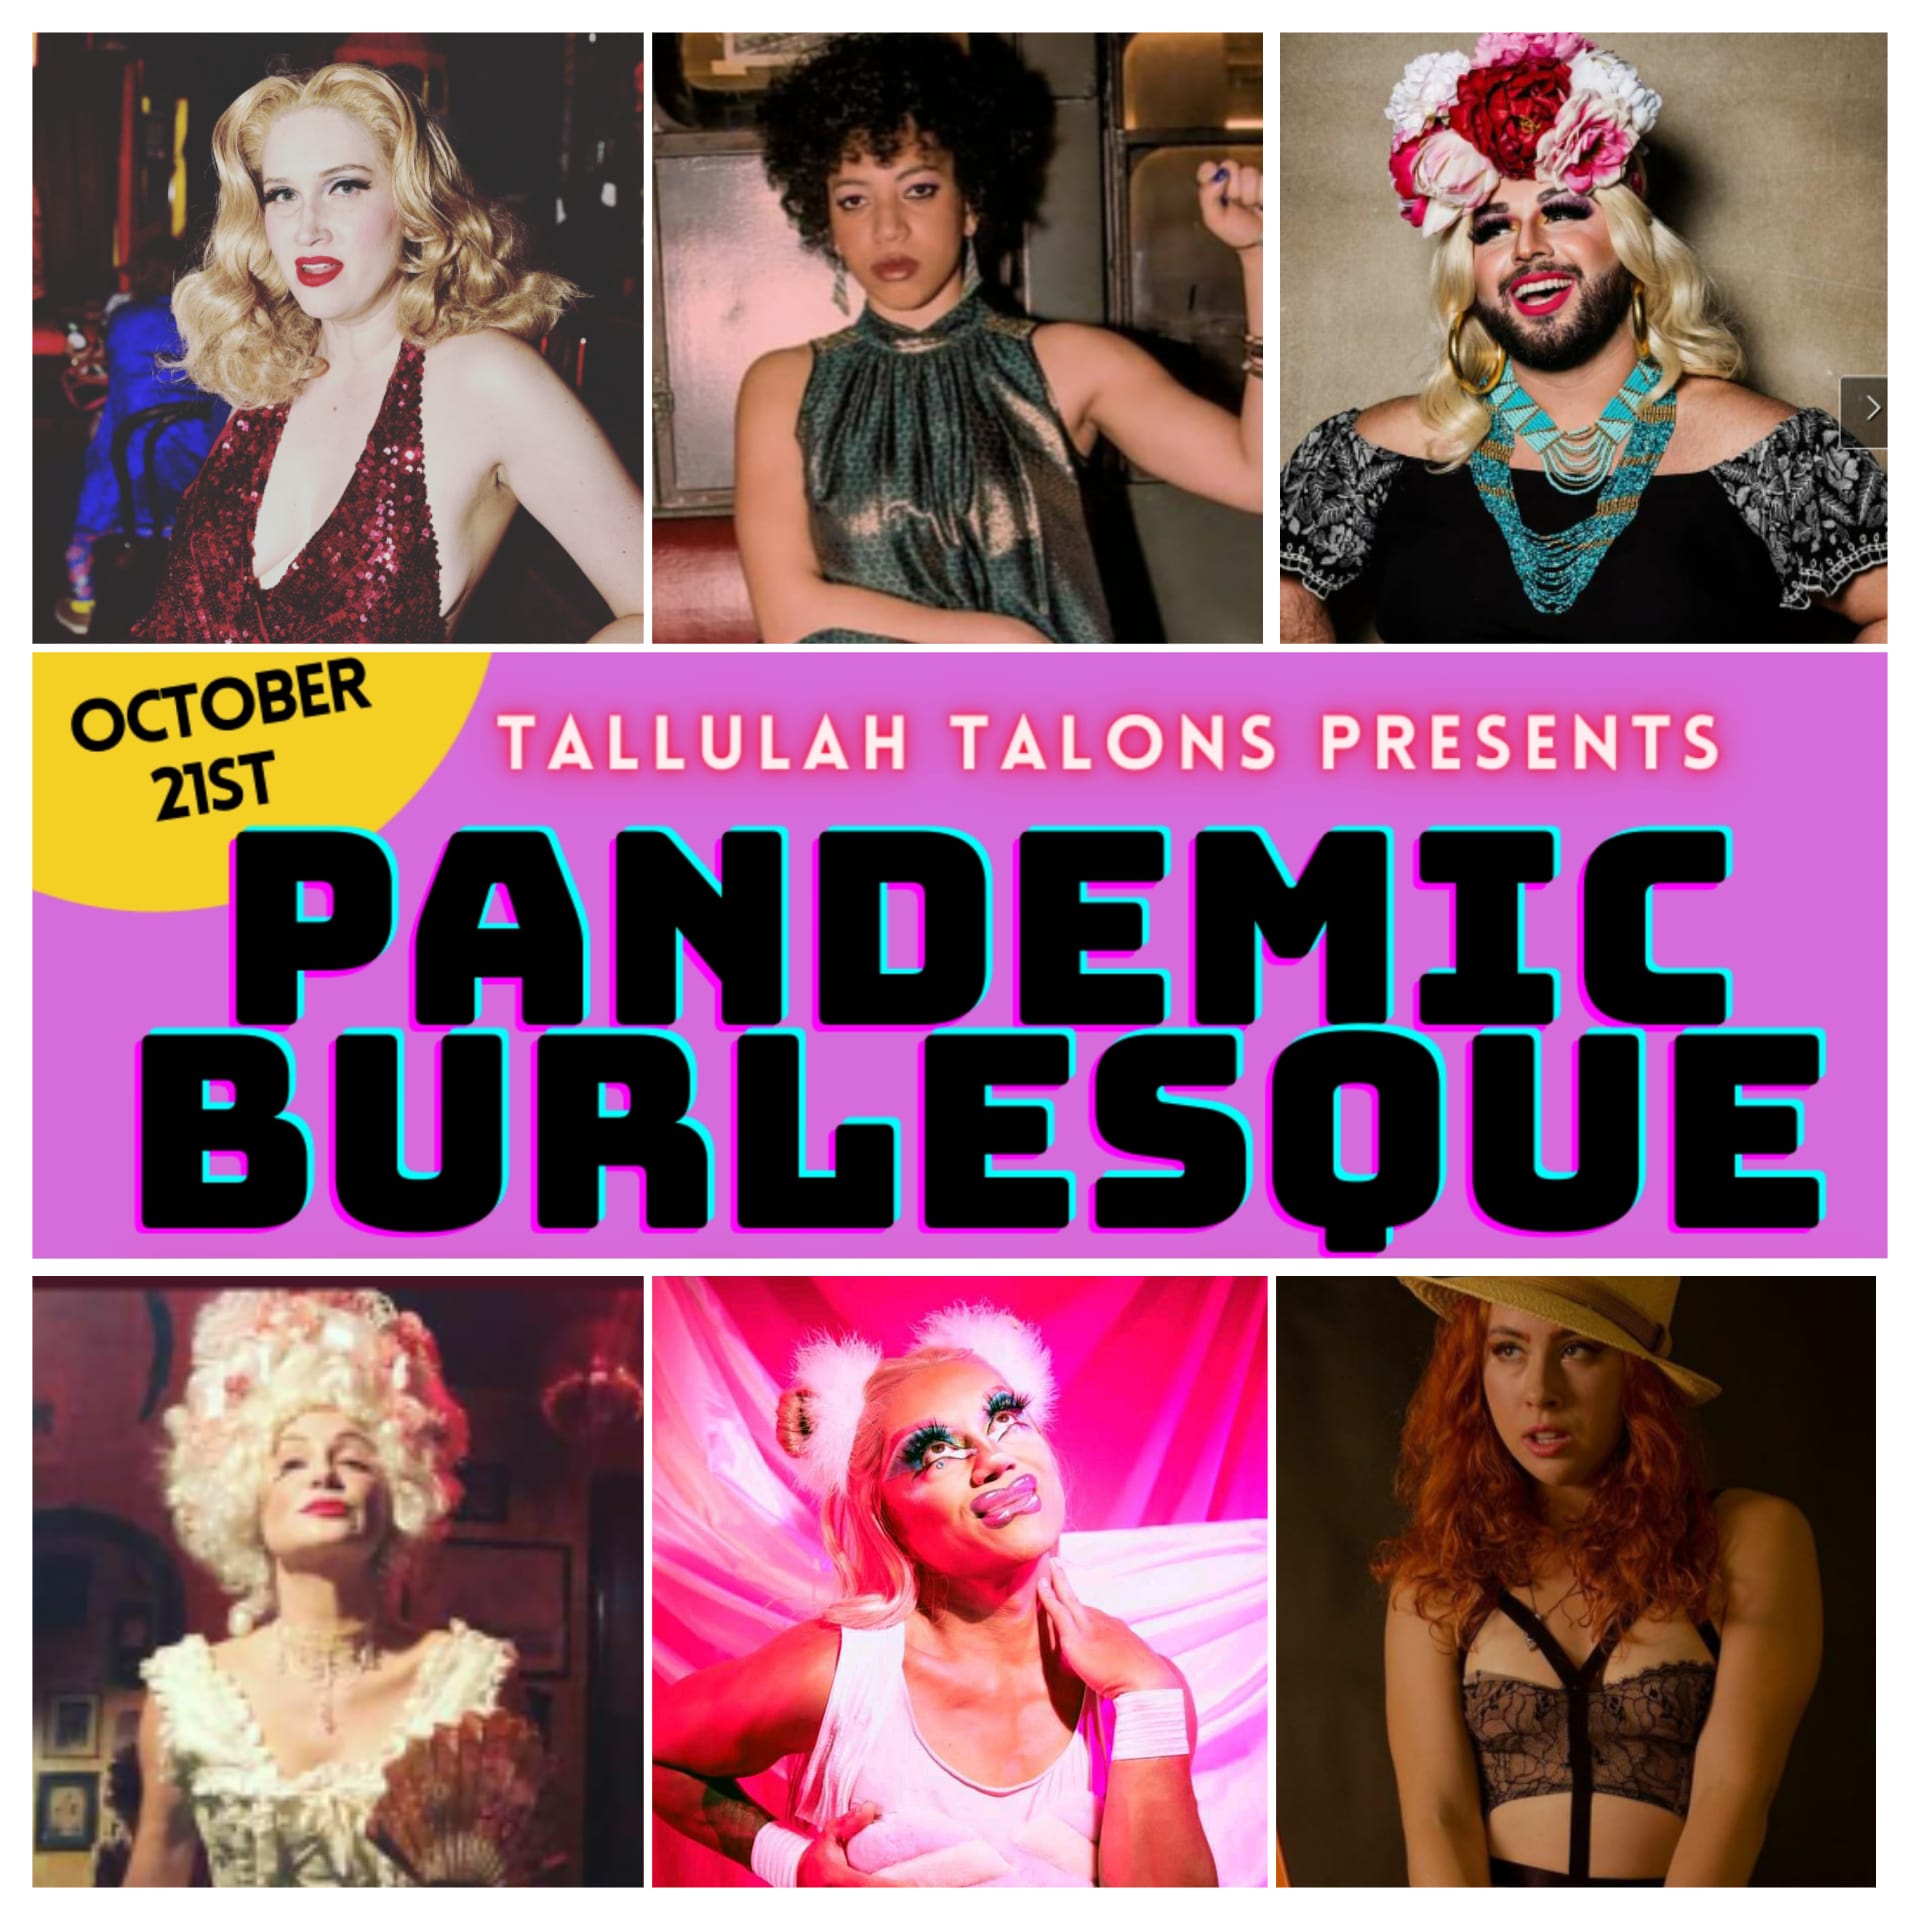 Buy Tickets For The October 21st Pandemic Burlesque Show